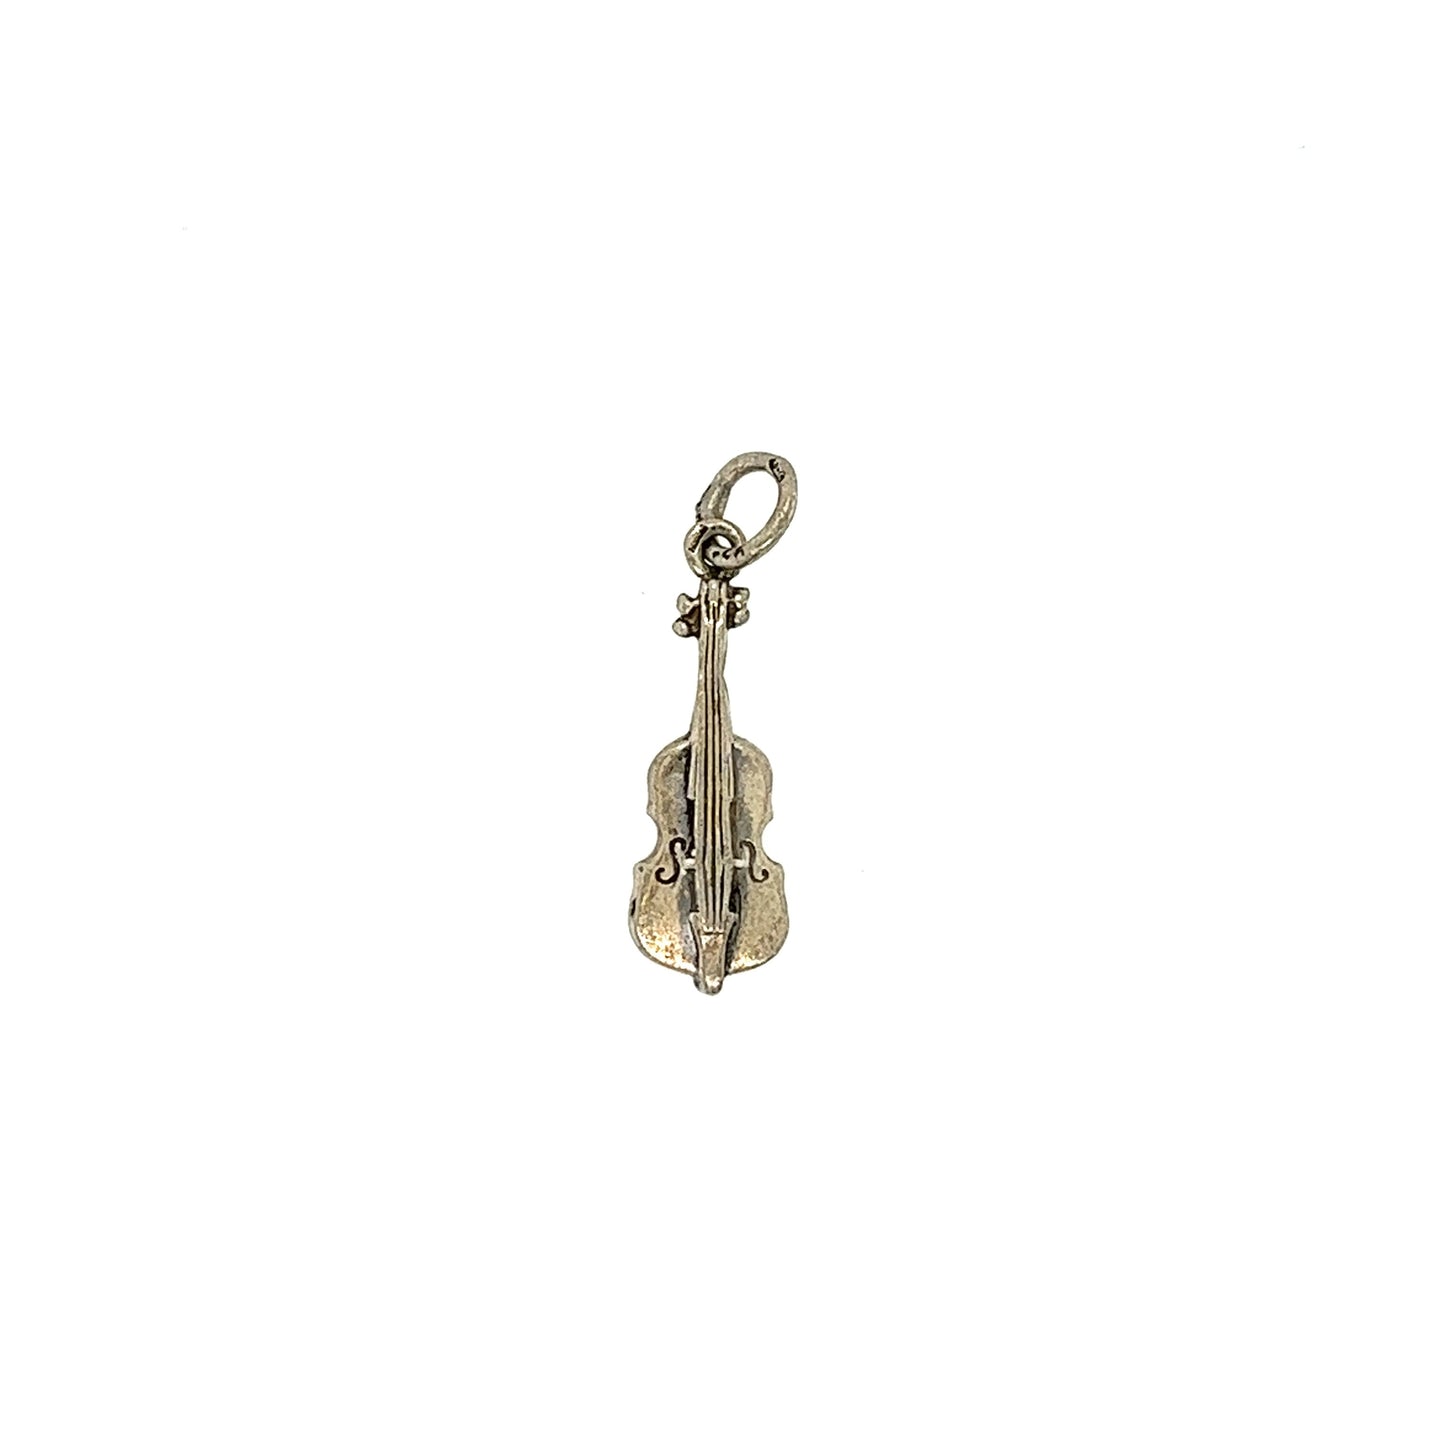 Vintage Cello Charm in Silver